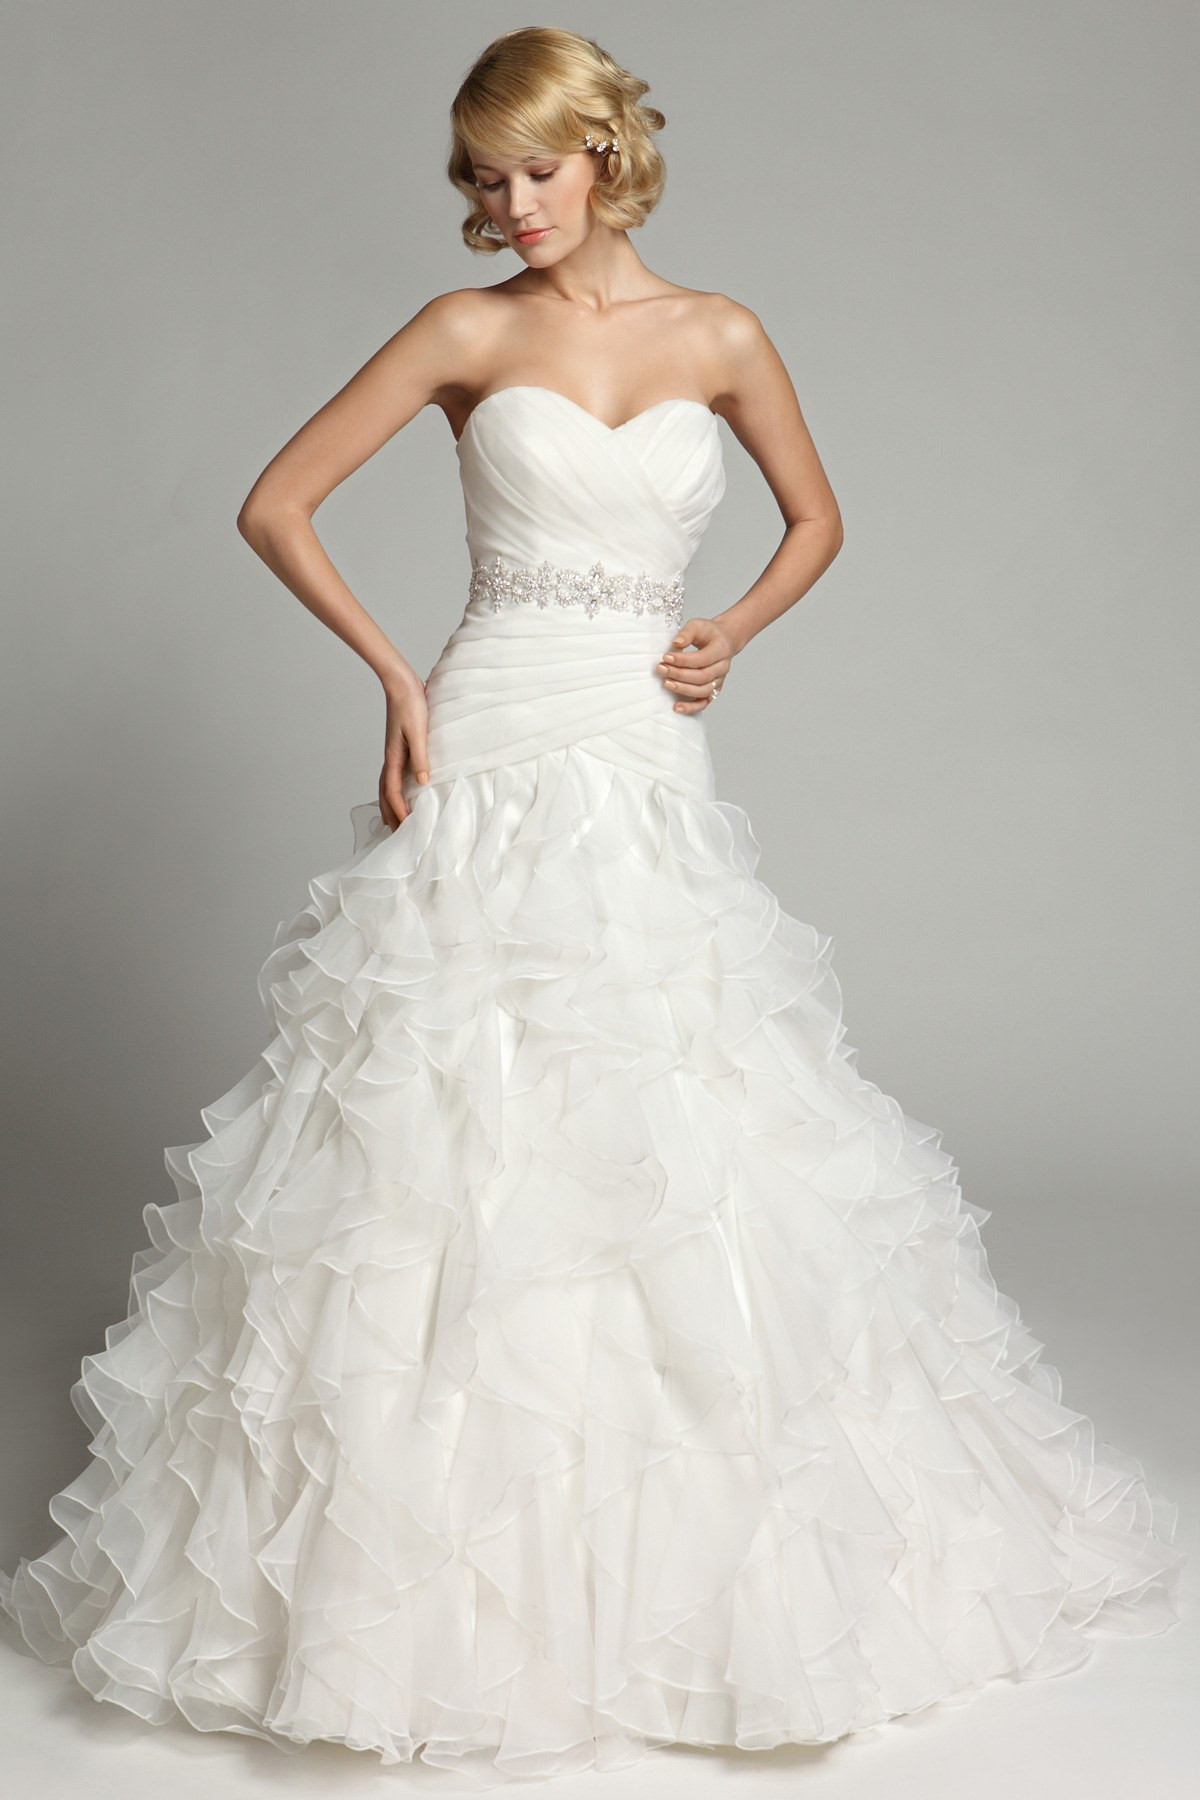 Build A Wedding Dress
 14 Elegant Wedding Gowns to Make Your Big Day Special